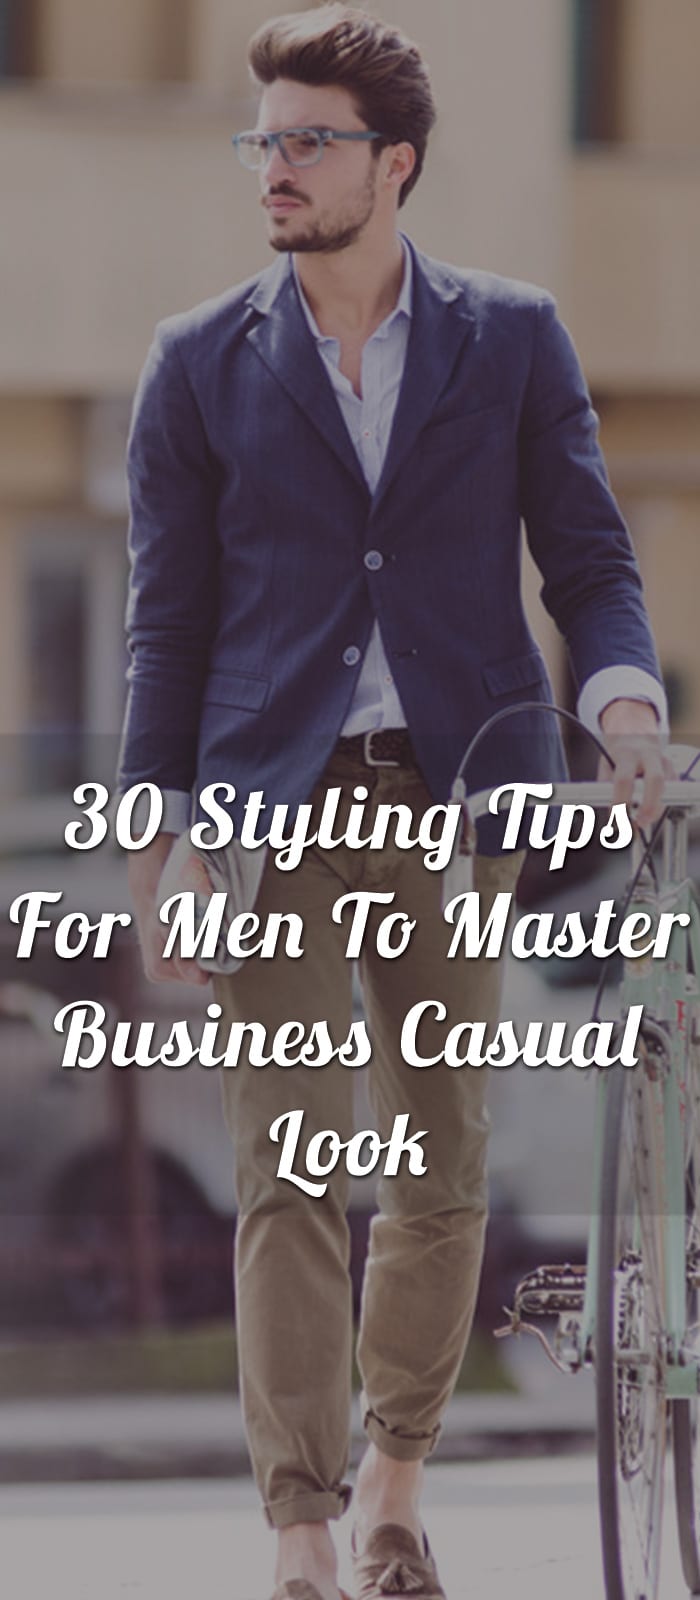 30-Styling-Tips-For-Men-To-Master-Business-Casual-Look